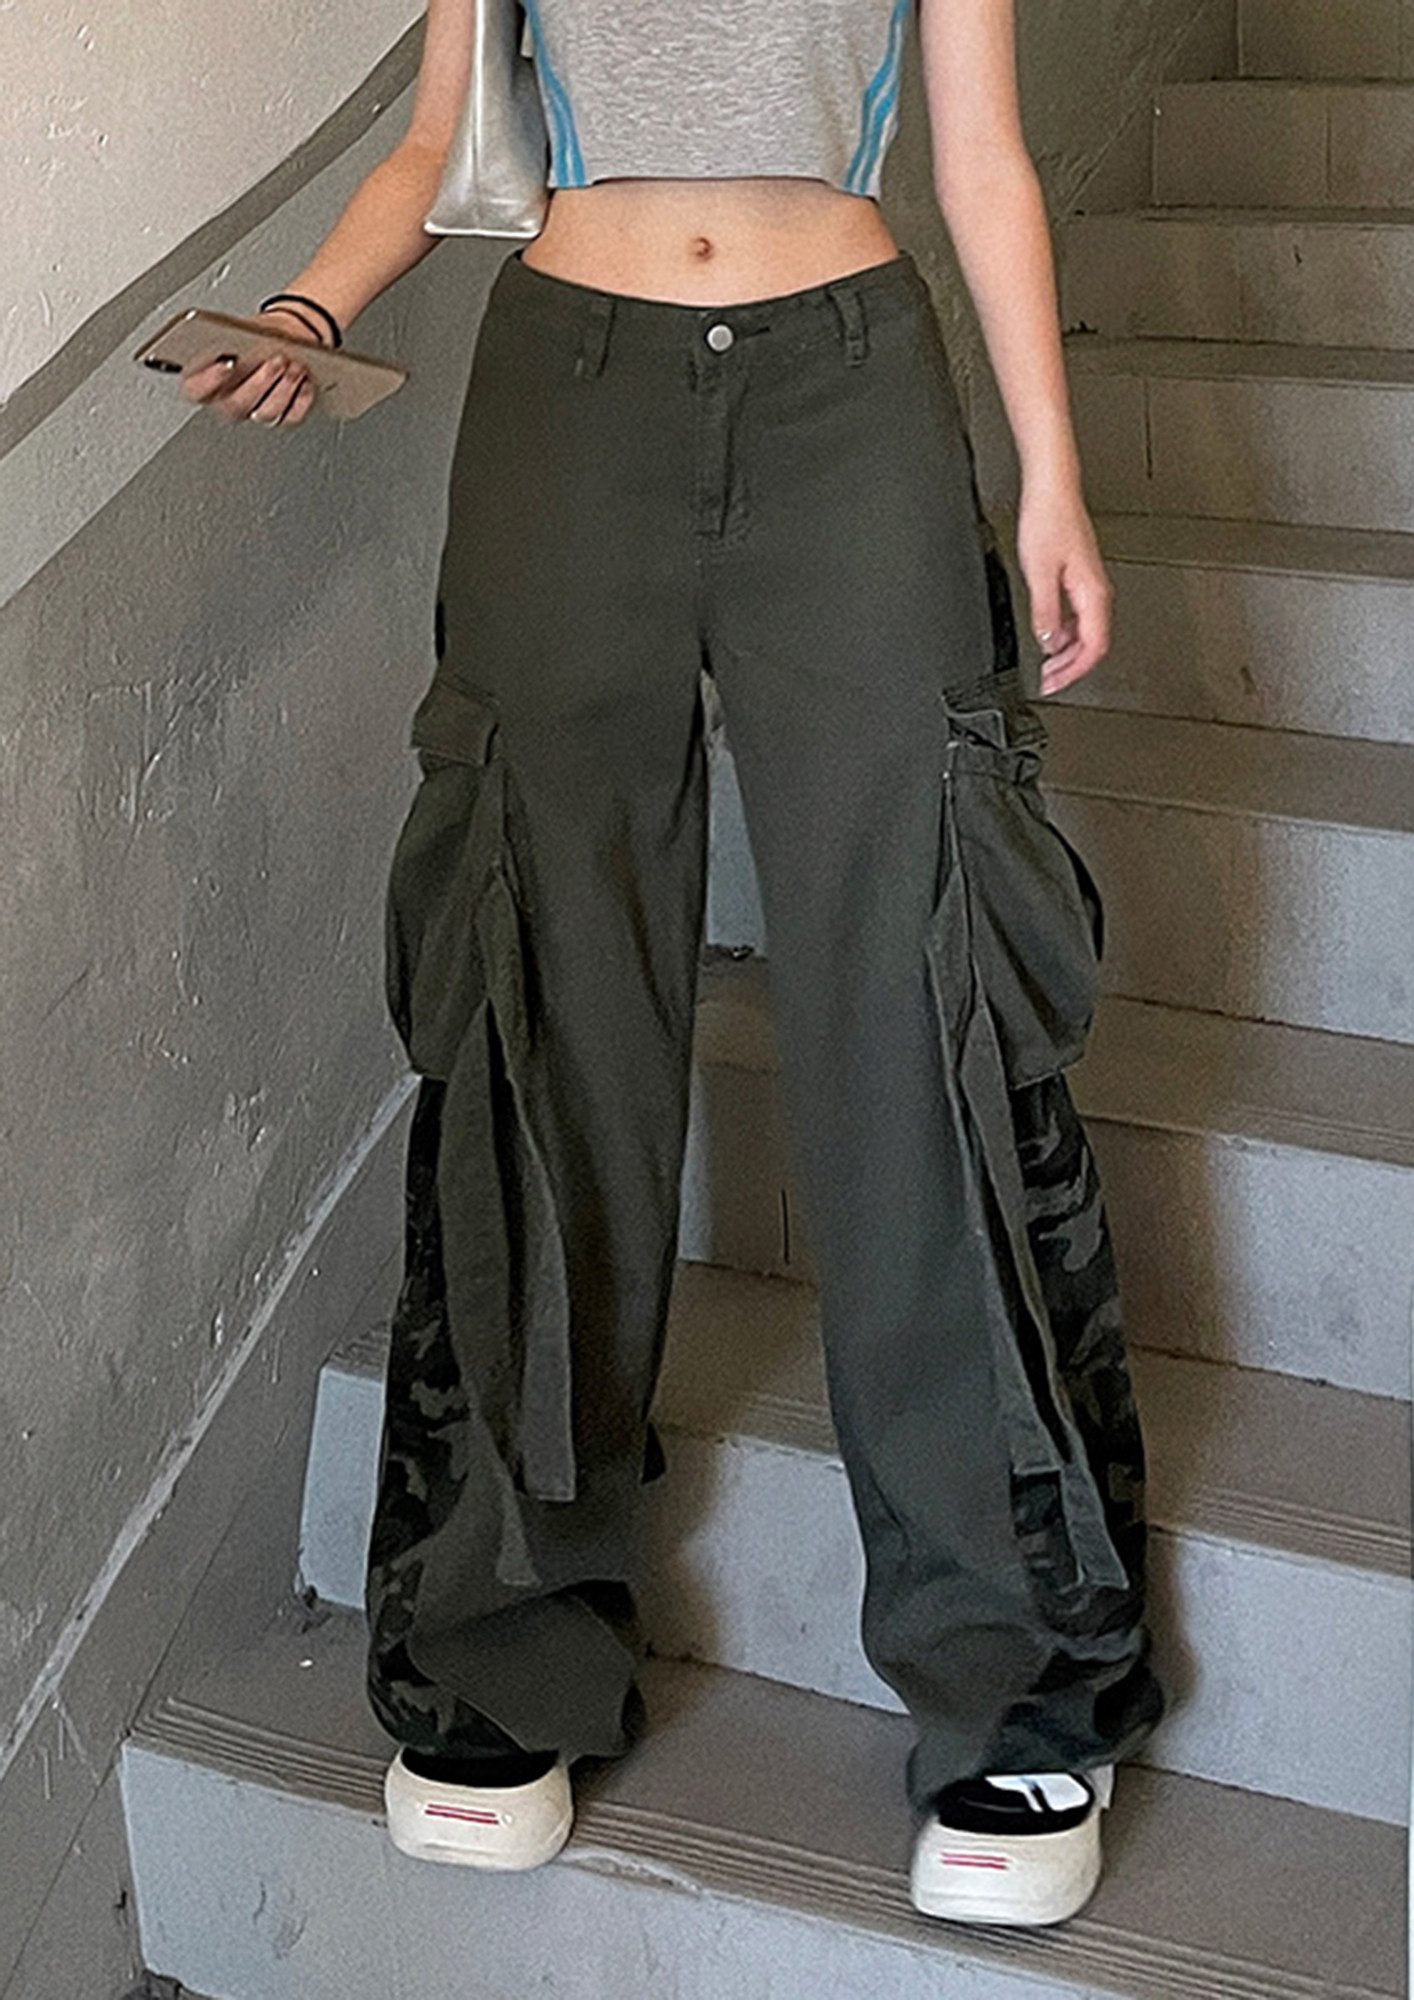 Camouflage Track Pants  Buy Camouflage Track Pants Online Starting at Just  239  Meesho